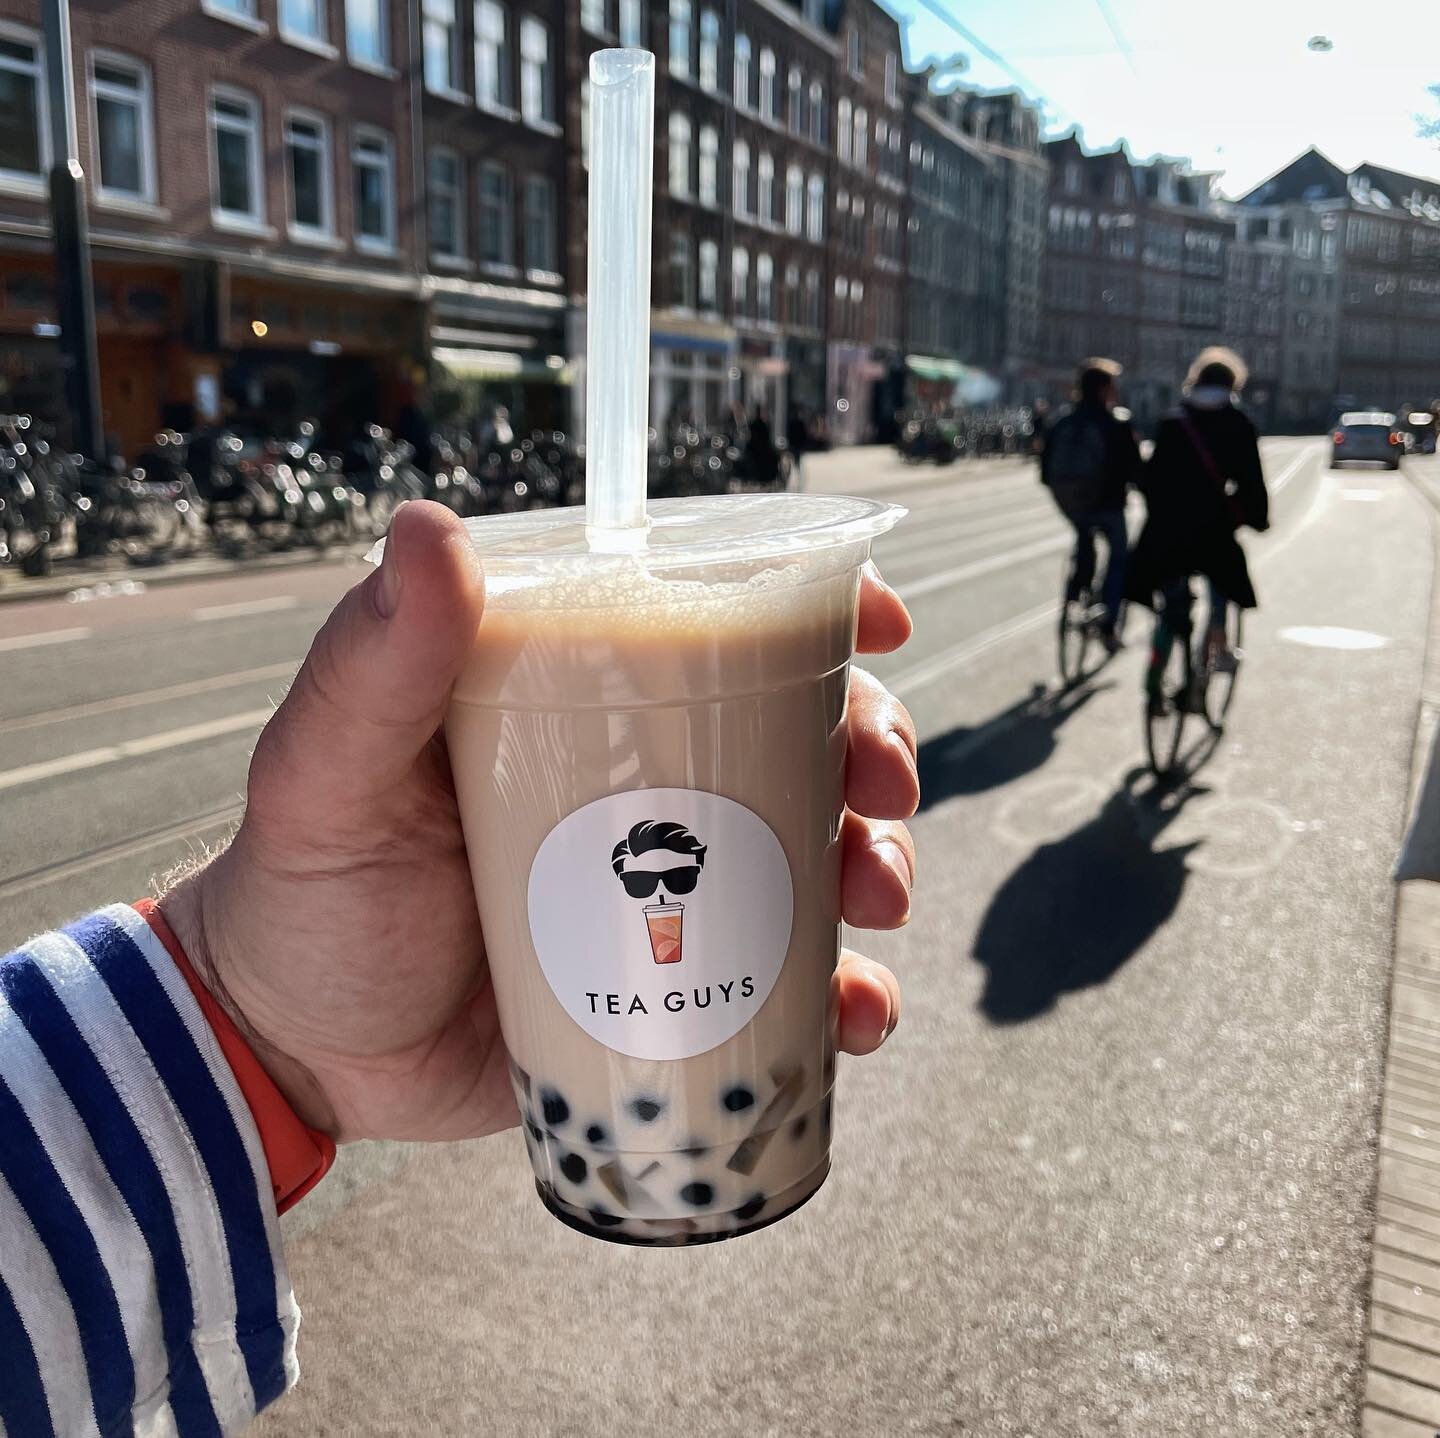 A fun time bubble tea sampling @teaguysnl in De Pijp! A tonne of options to choose from including sugar and milk selections with online pre-orders recommended to help skip the queue at busy periods. Thanks to @_rdr_16 for the recc!🧋❤️ 

__
#brunches